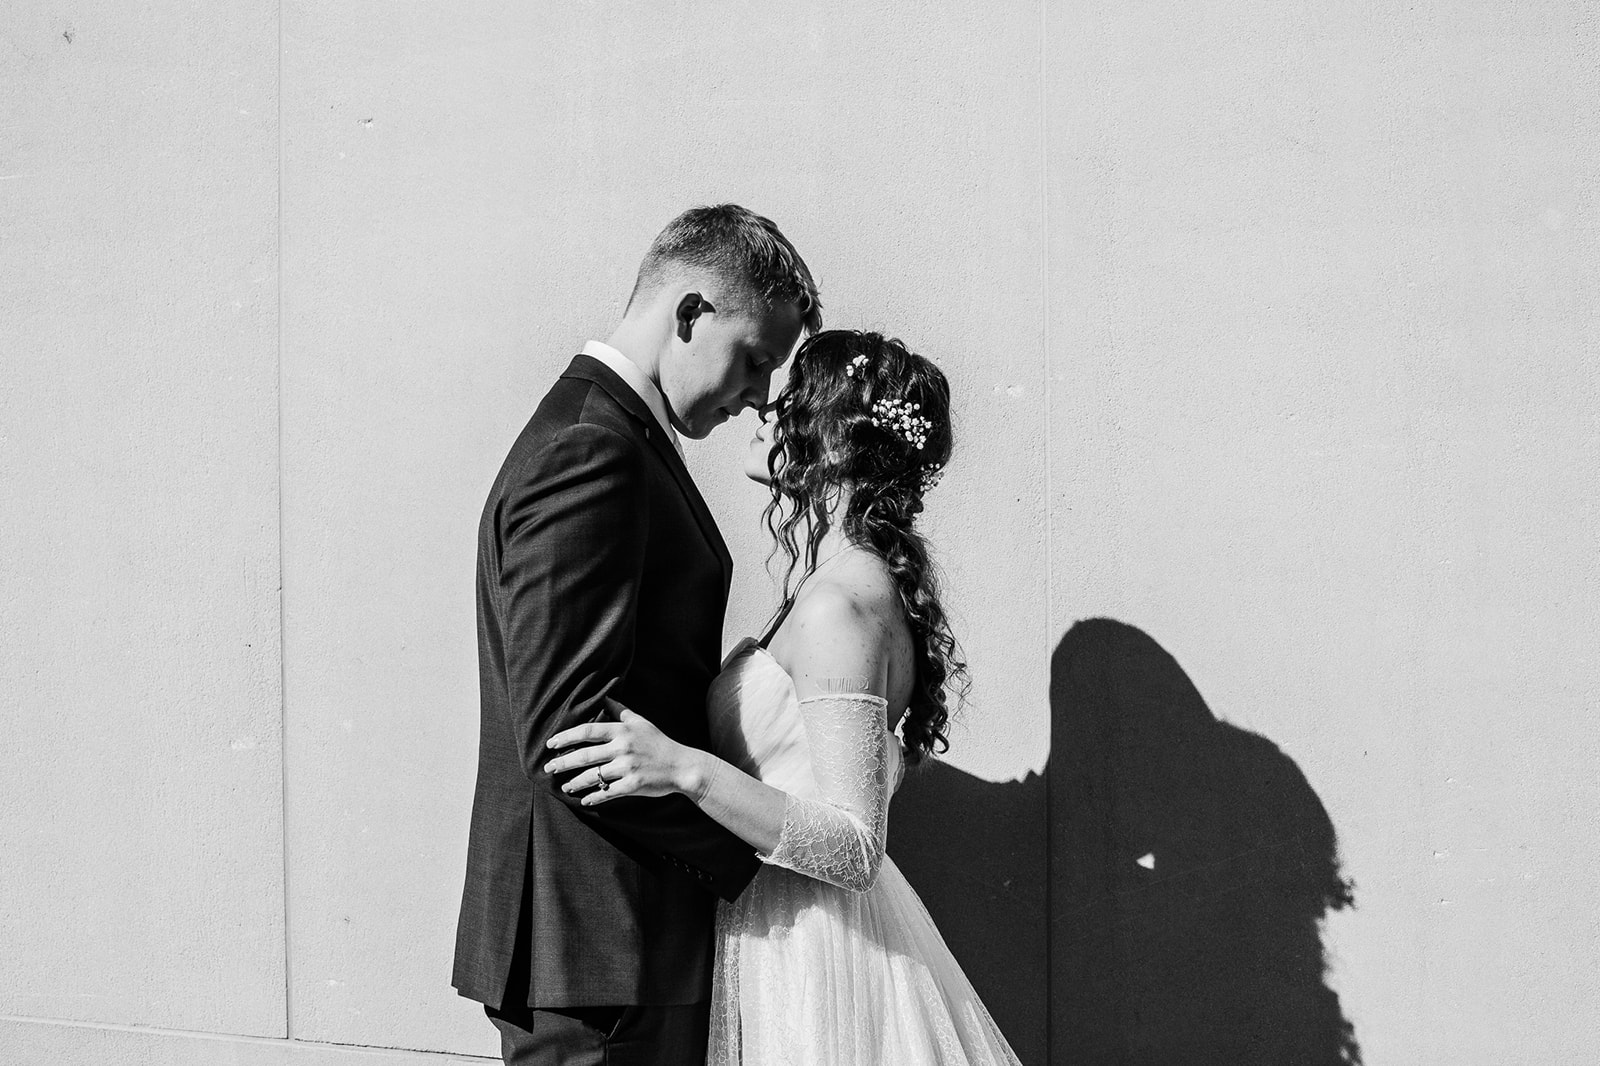 Sienna & Austin, Bismark, Nd by Abigail Maki Photography. Includes bridal fashion, wedding inspiration and wedding details. Book your San Fransico wedding and browse the blog for more inspiration #wedding #photography #weddingphotography #sanfranciscophotographer